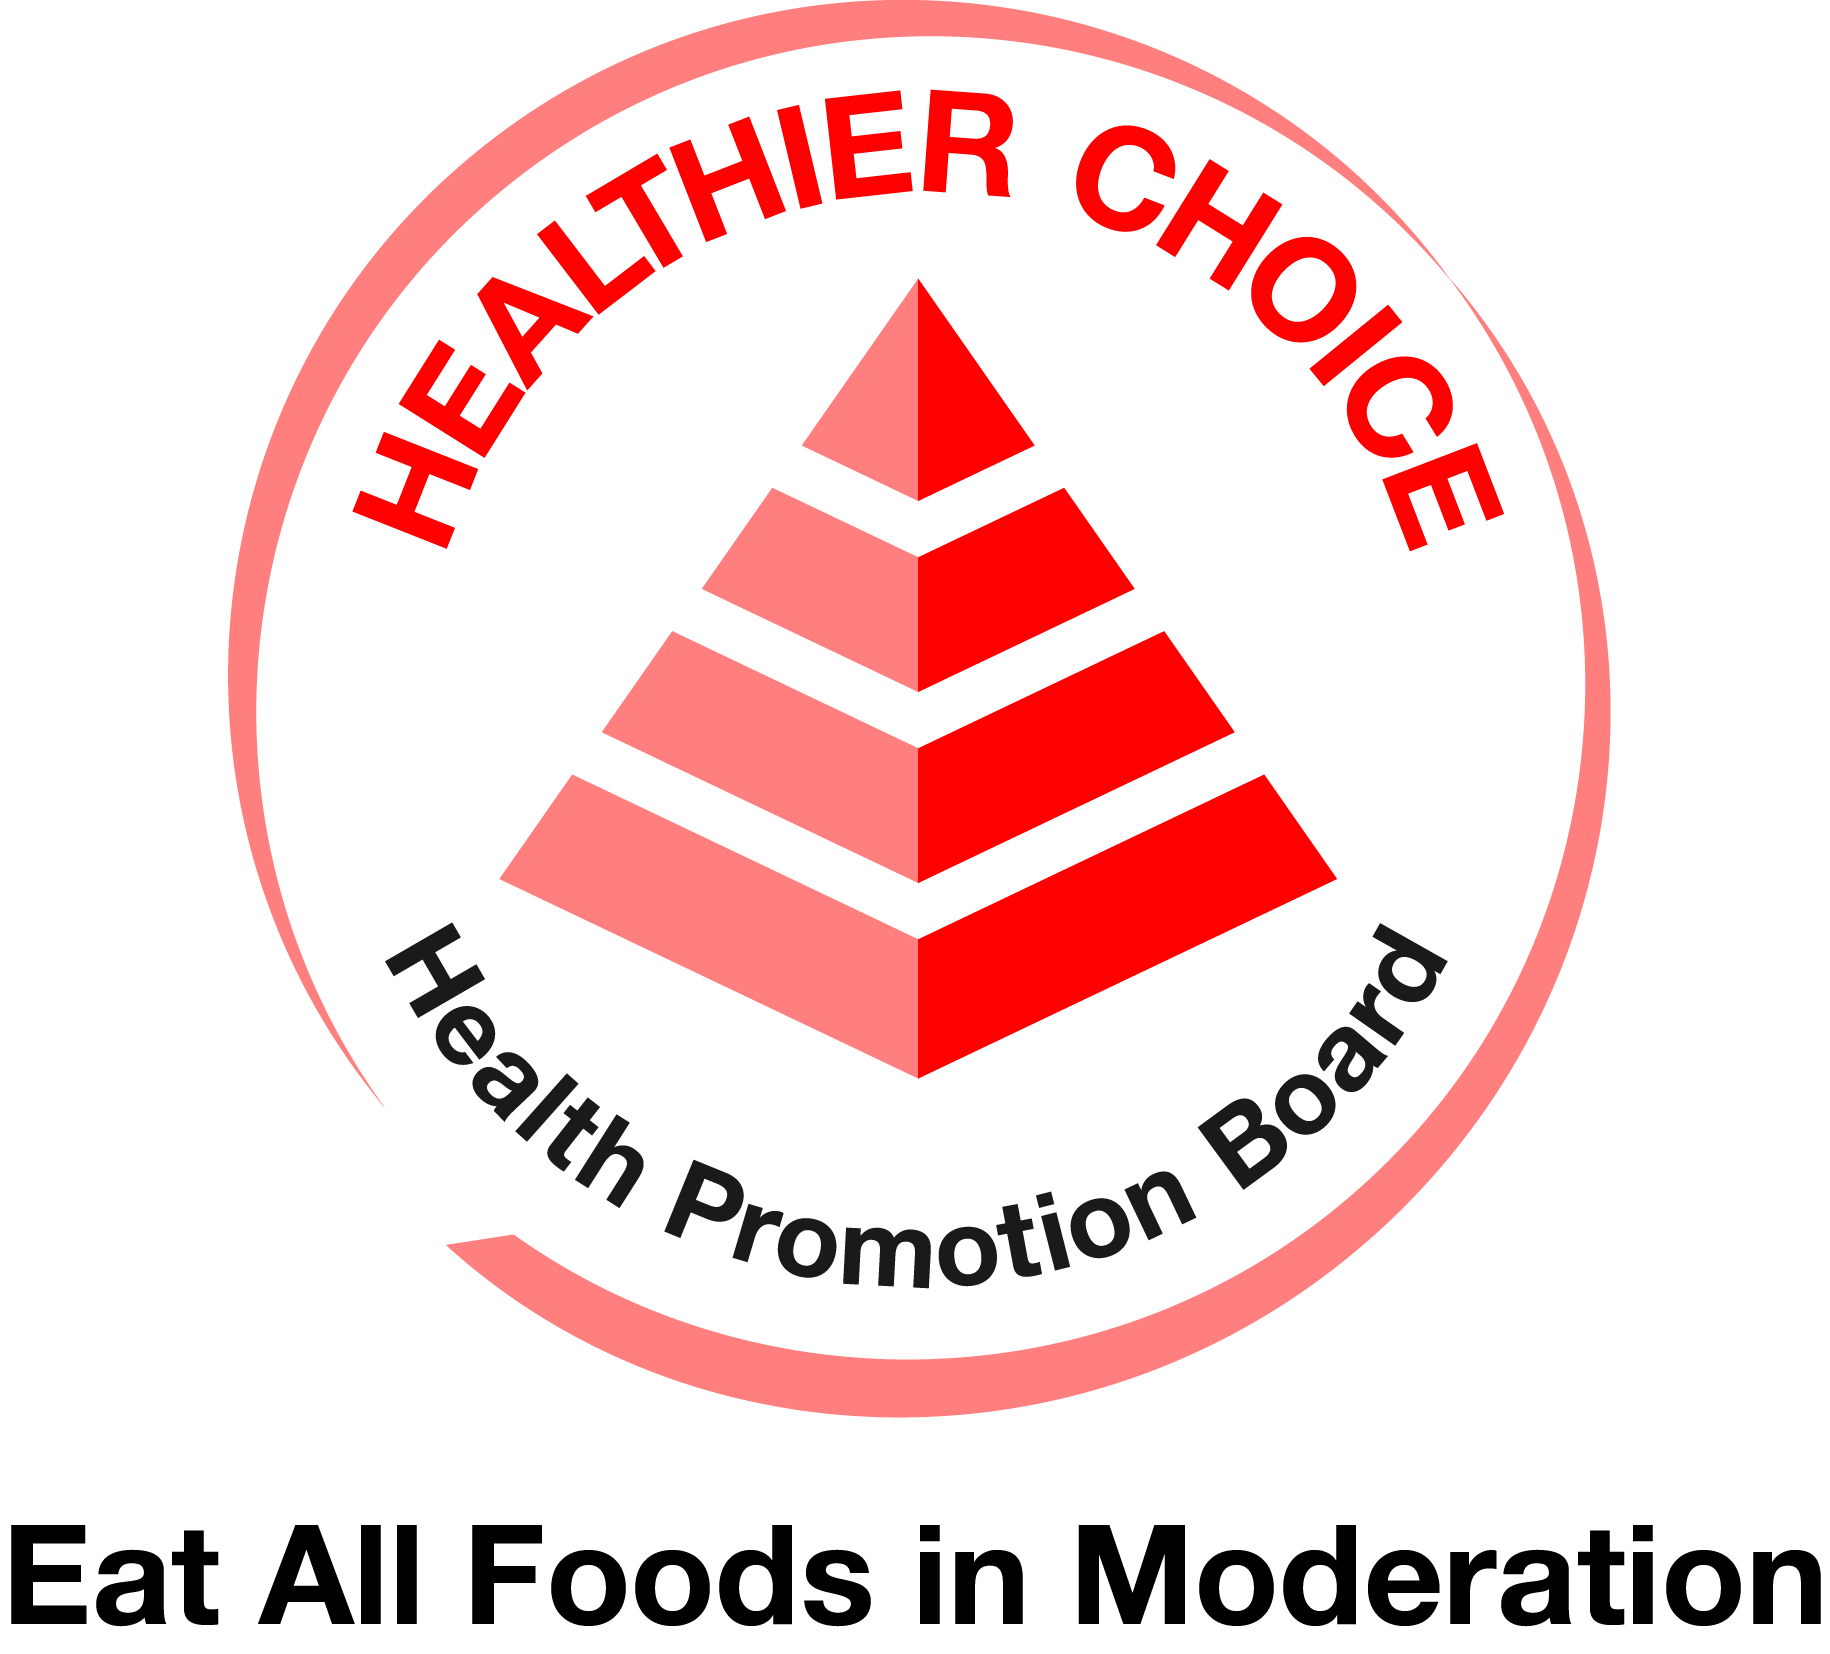 Choose products with the Healthier Choice Symbol